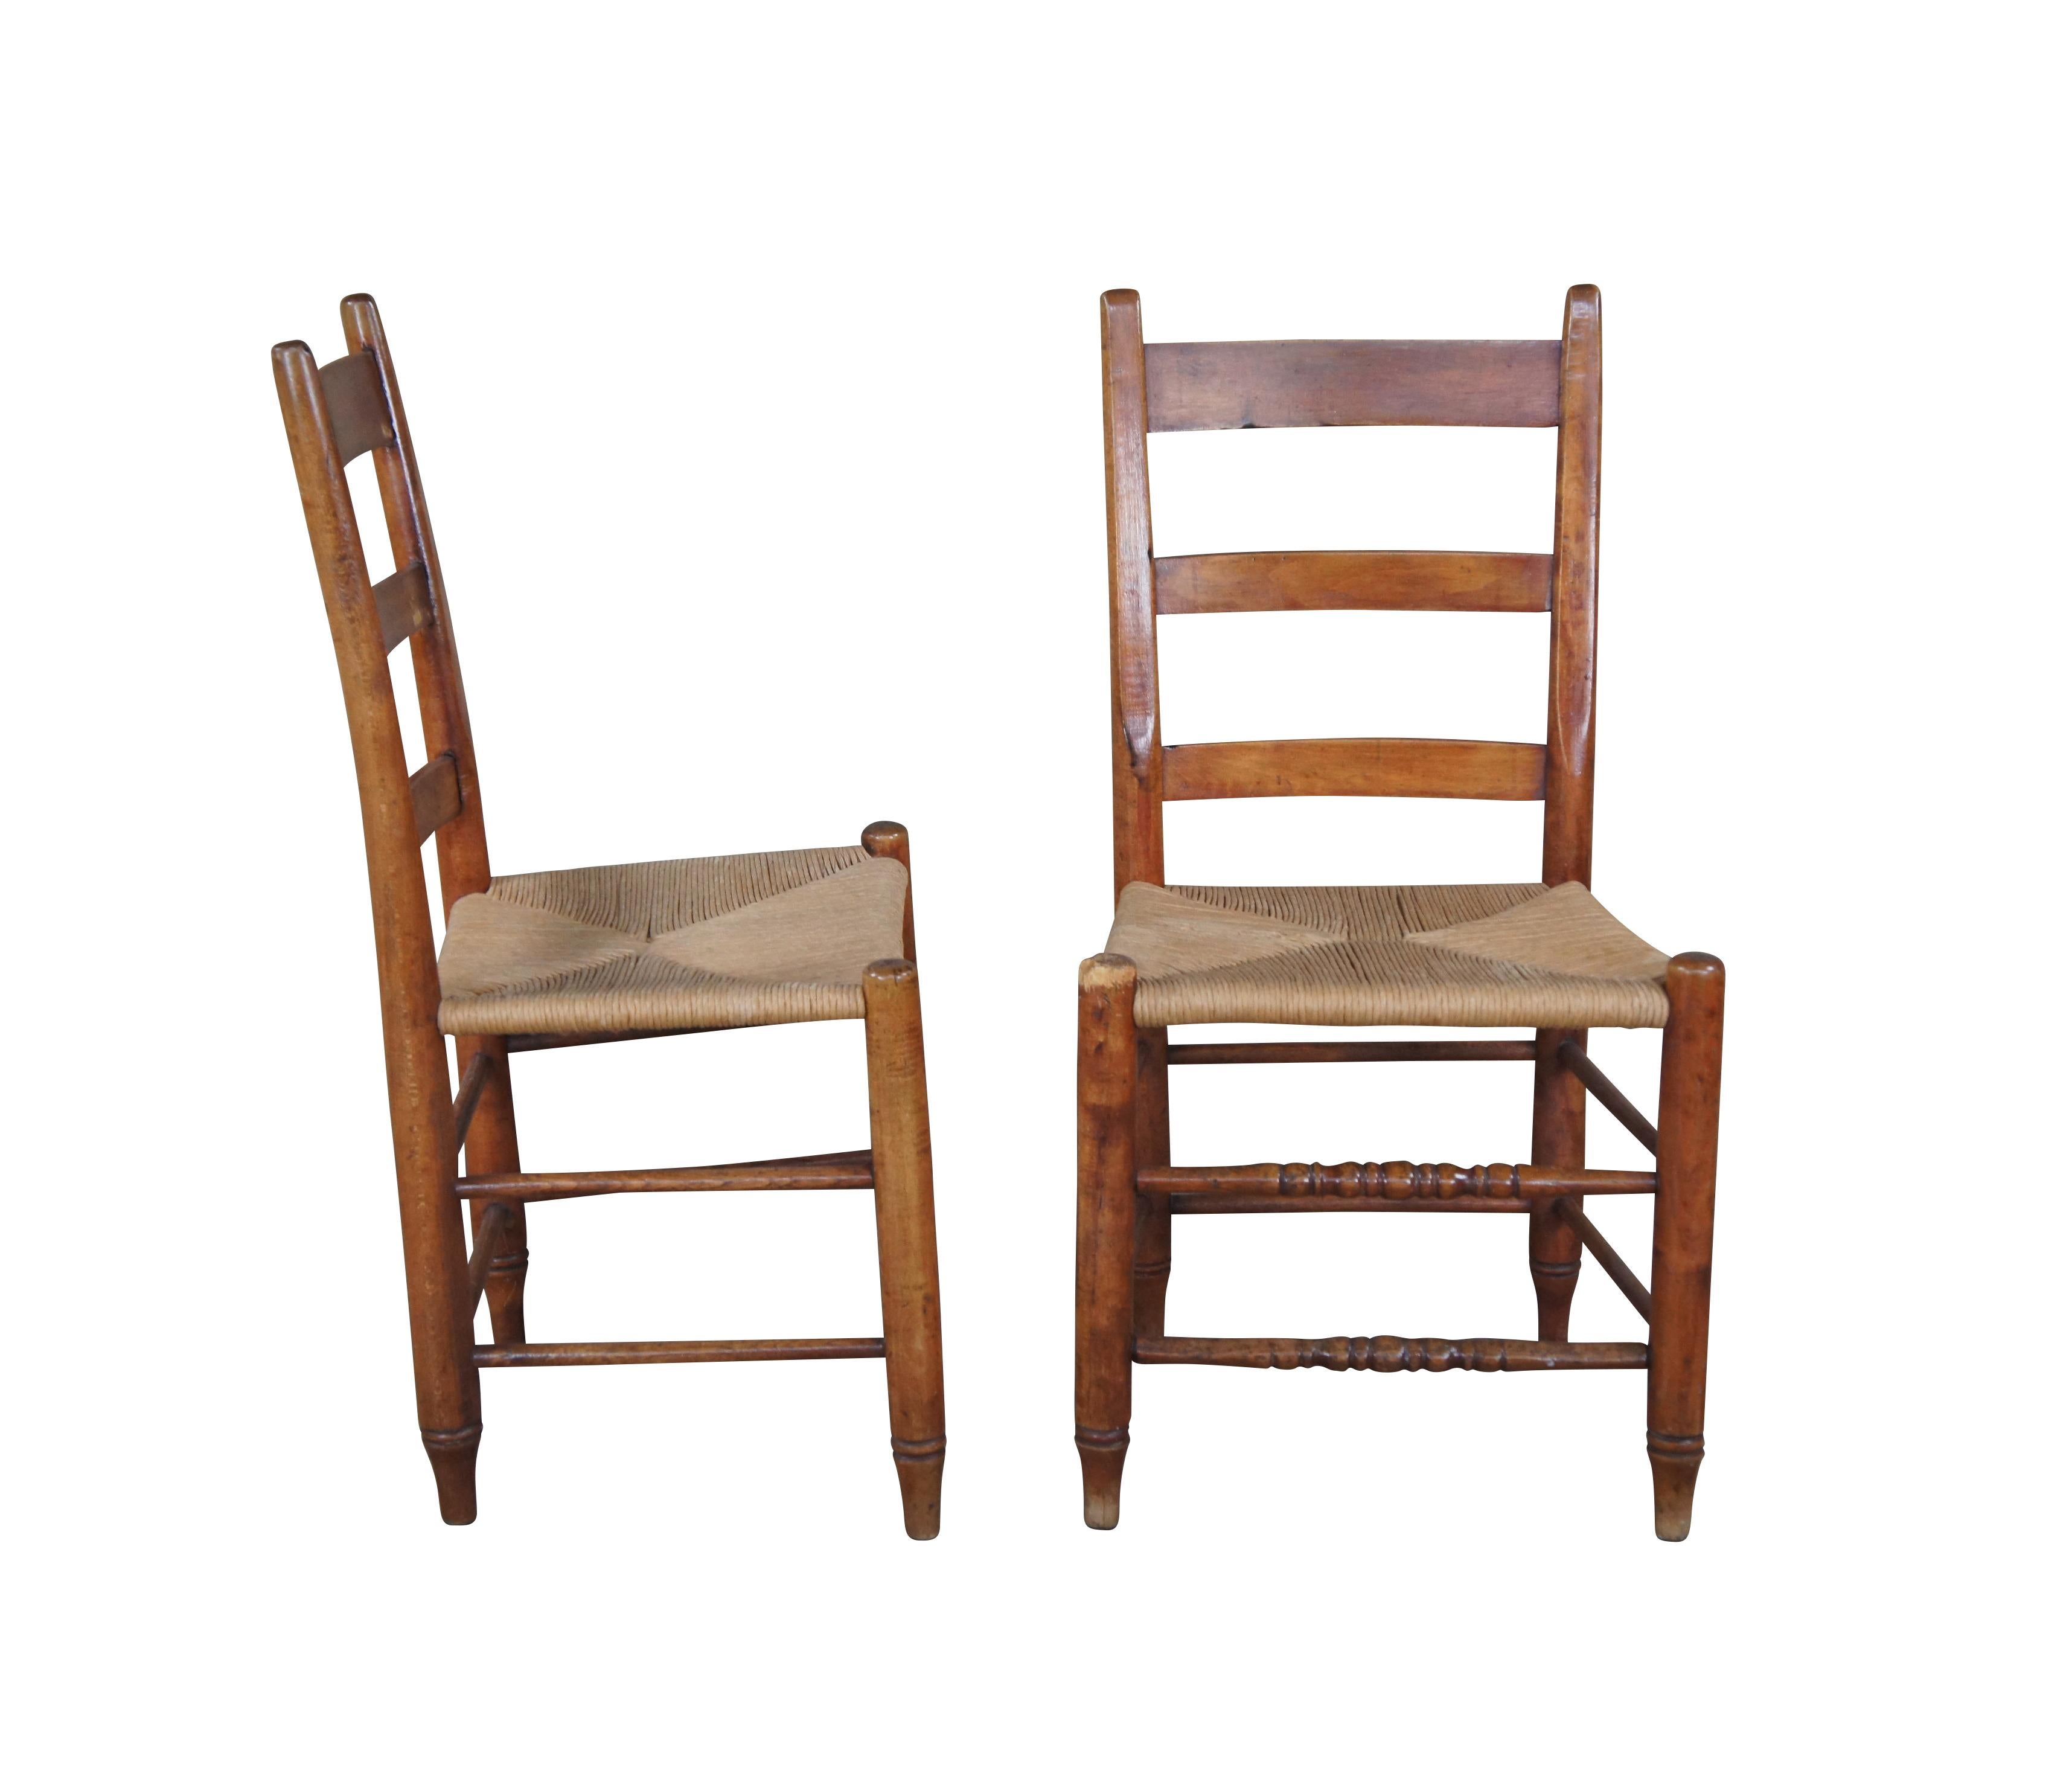 Two primitive antique ladderback chairs. Made of maple featuring turned supports, with rush seat and ladder back.

Dimensions:
18